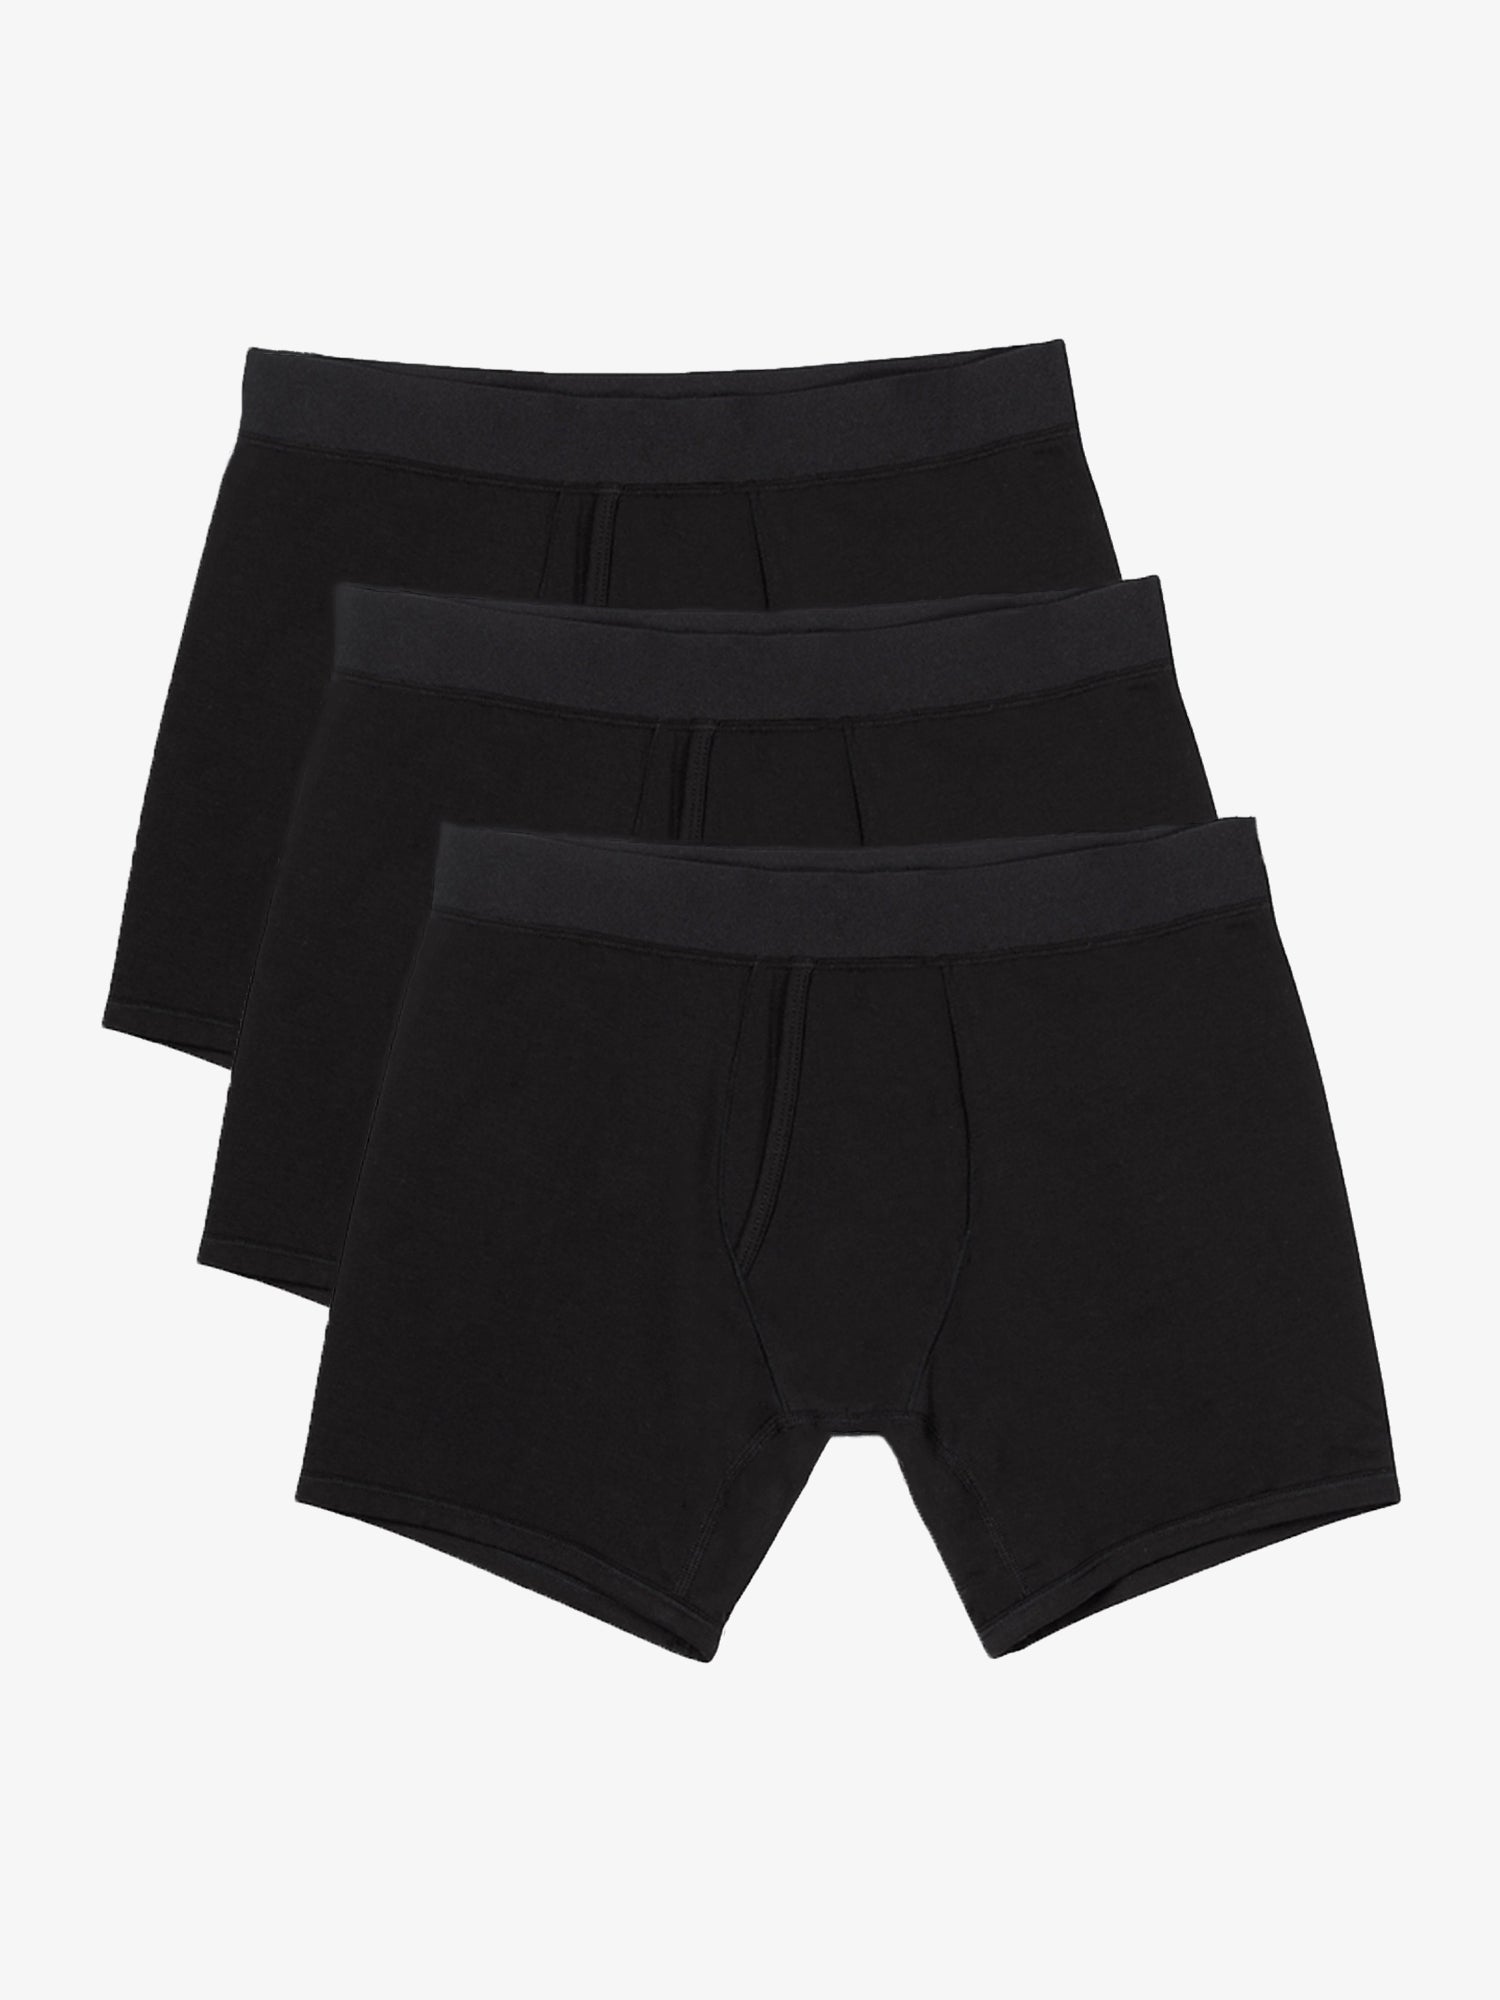 Foundation Boxer Brief 3-Pack